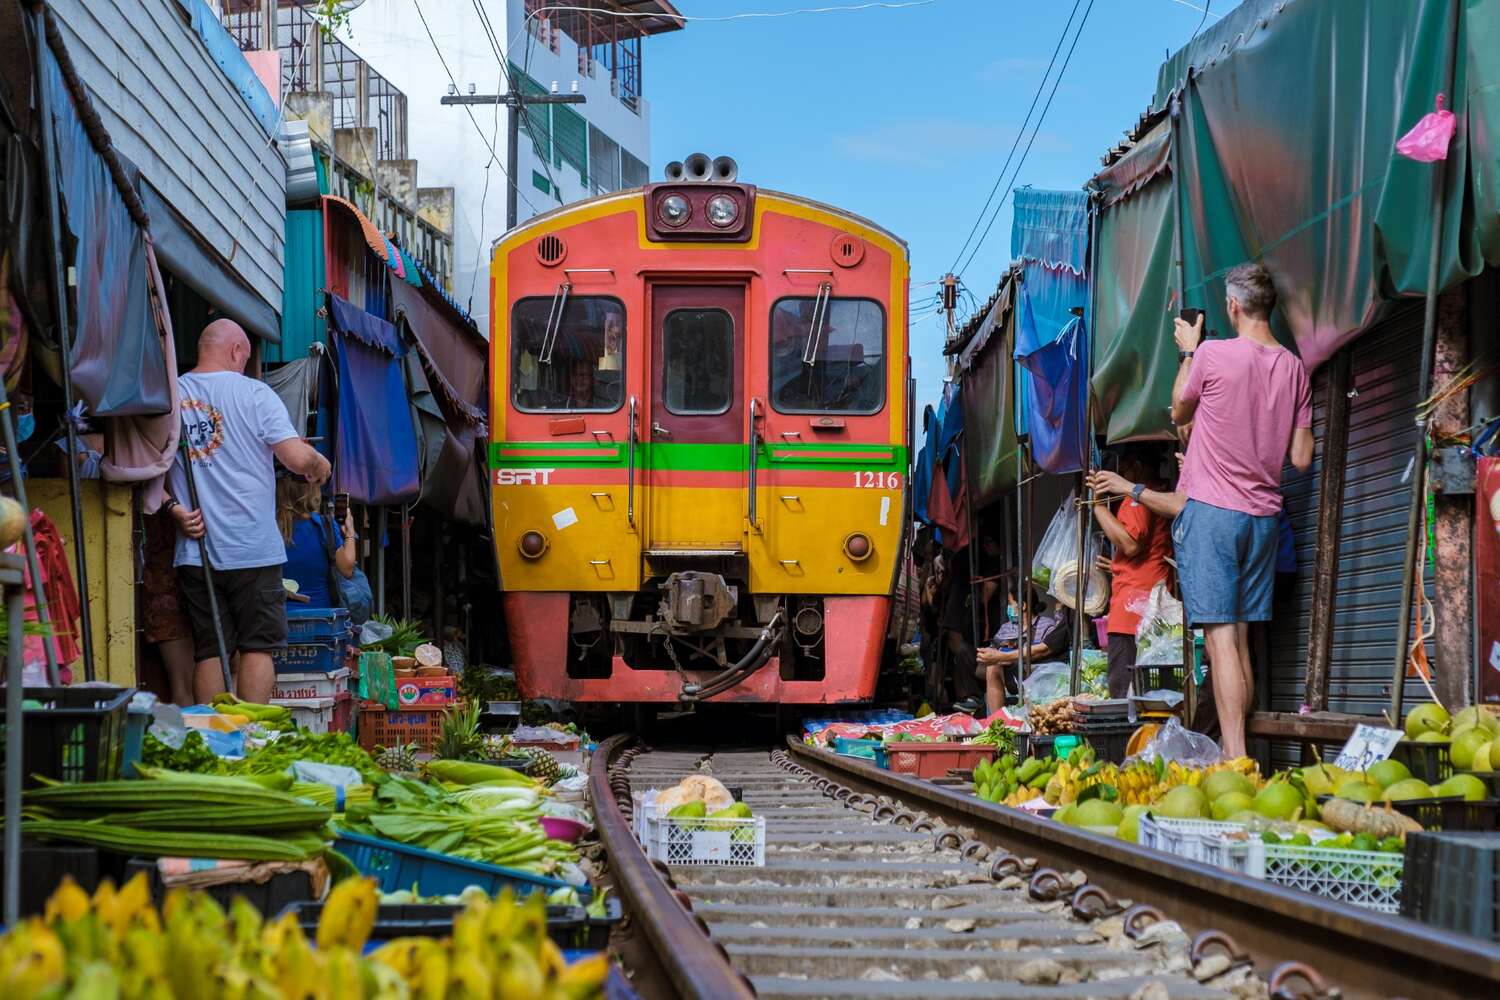 A colorful train passes through a market, with vendors and goods very close to the train tracks.